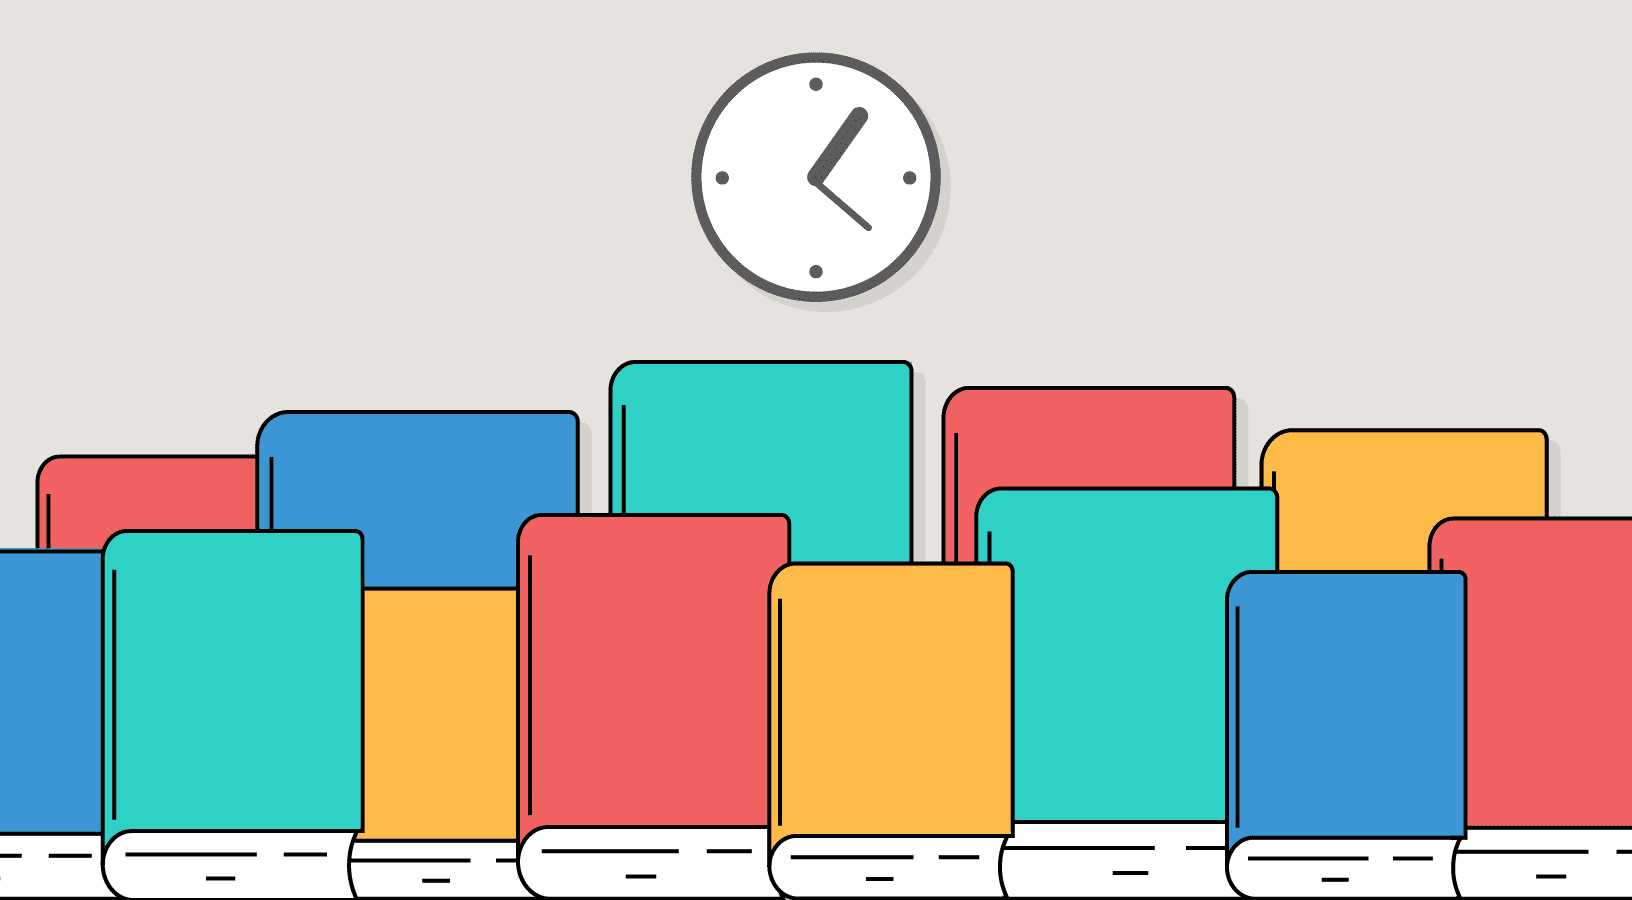 50 Popular Business Books and How Long it Takes to Read Them